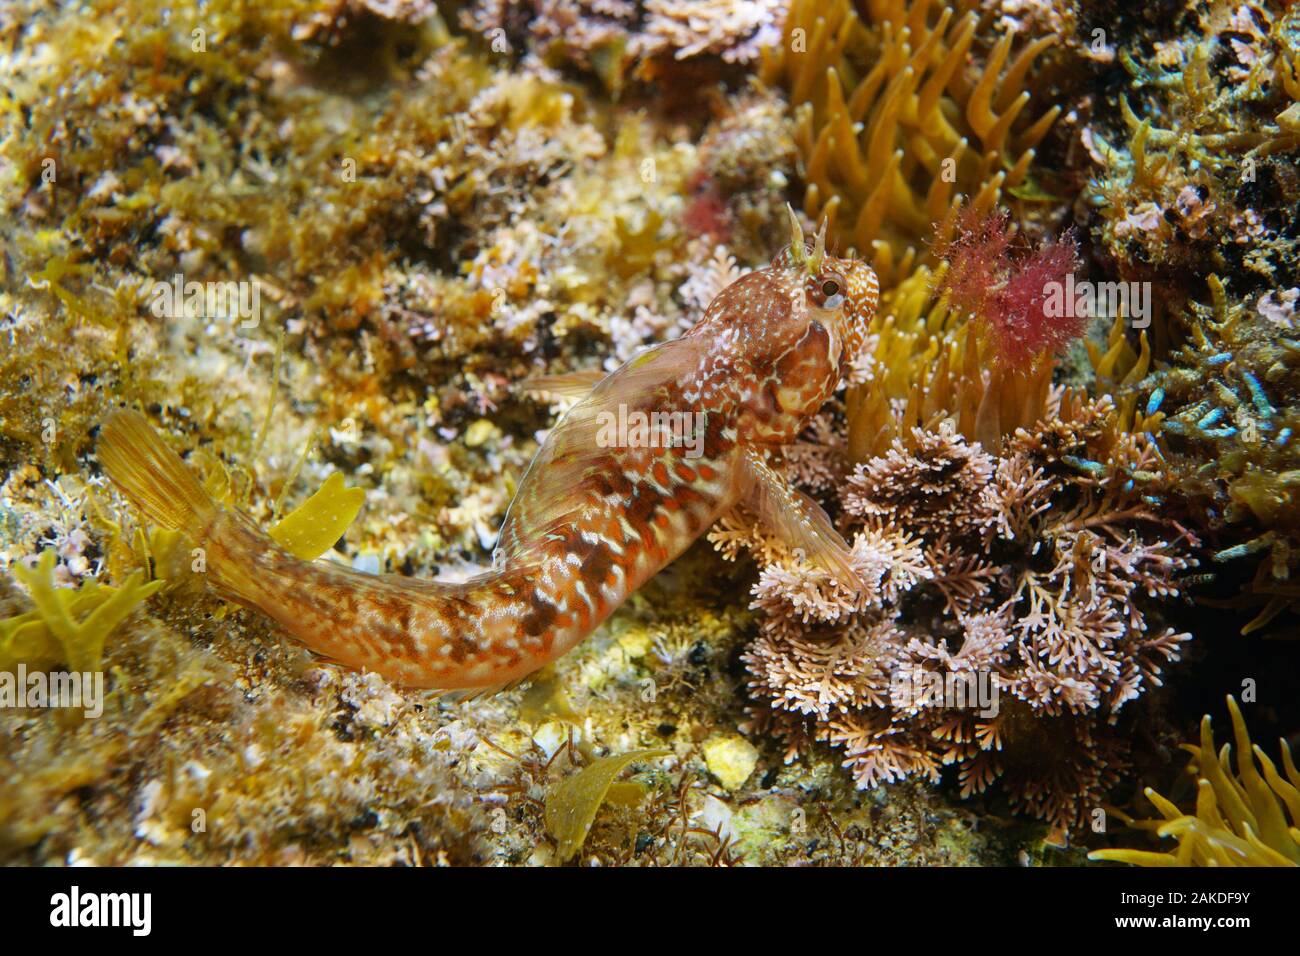 Close-up of a mystery blenny fish, Parablennius incognitus, underwater in the Mediterranean sea, France, Occitanie Stock Photo